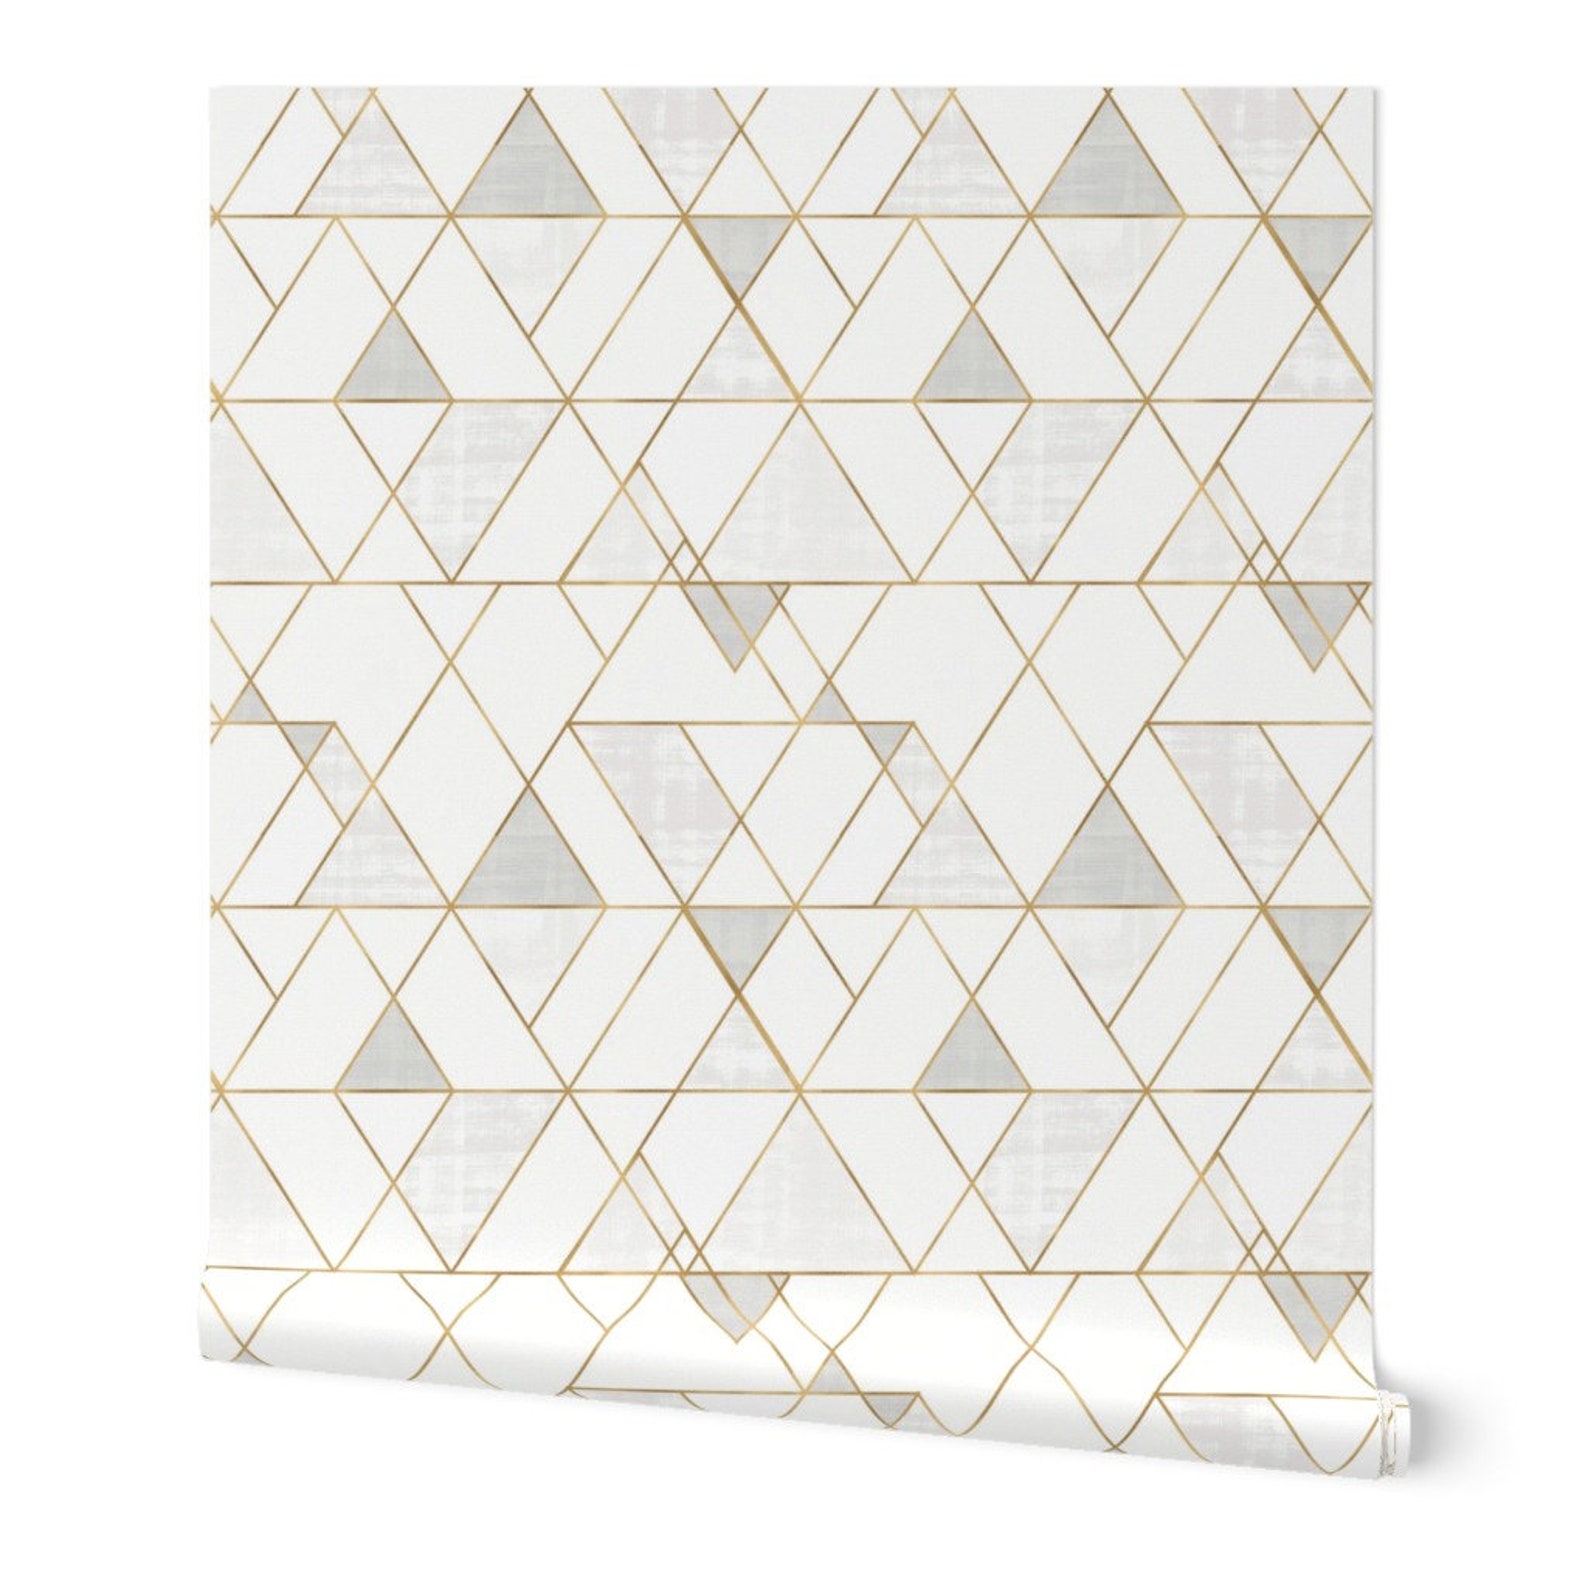 Mod Wallpaper Mod-triangles White-gold 12 Repeat by | Etsy